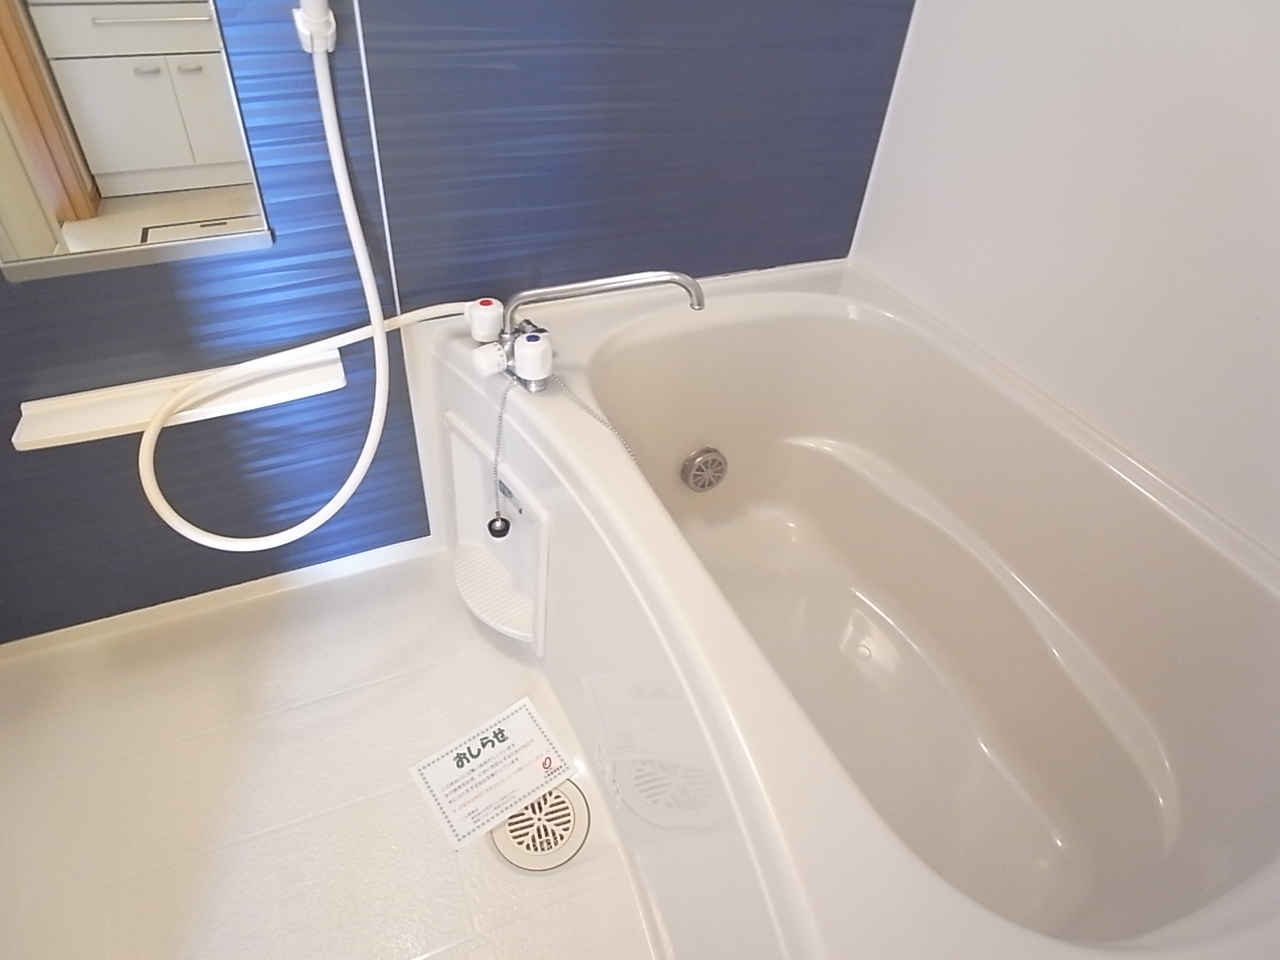 Bath. ^^ Will dry your laundry warm even on rainy days with a bathroom ventilation dryer